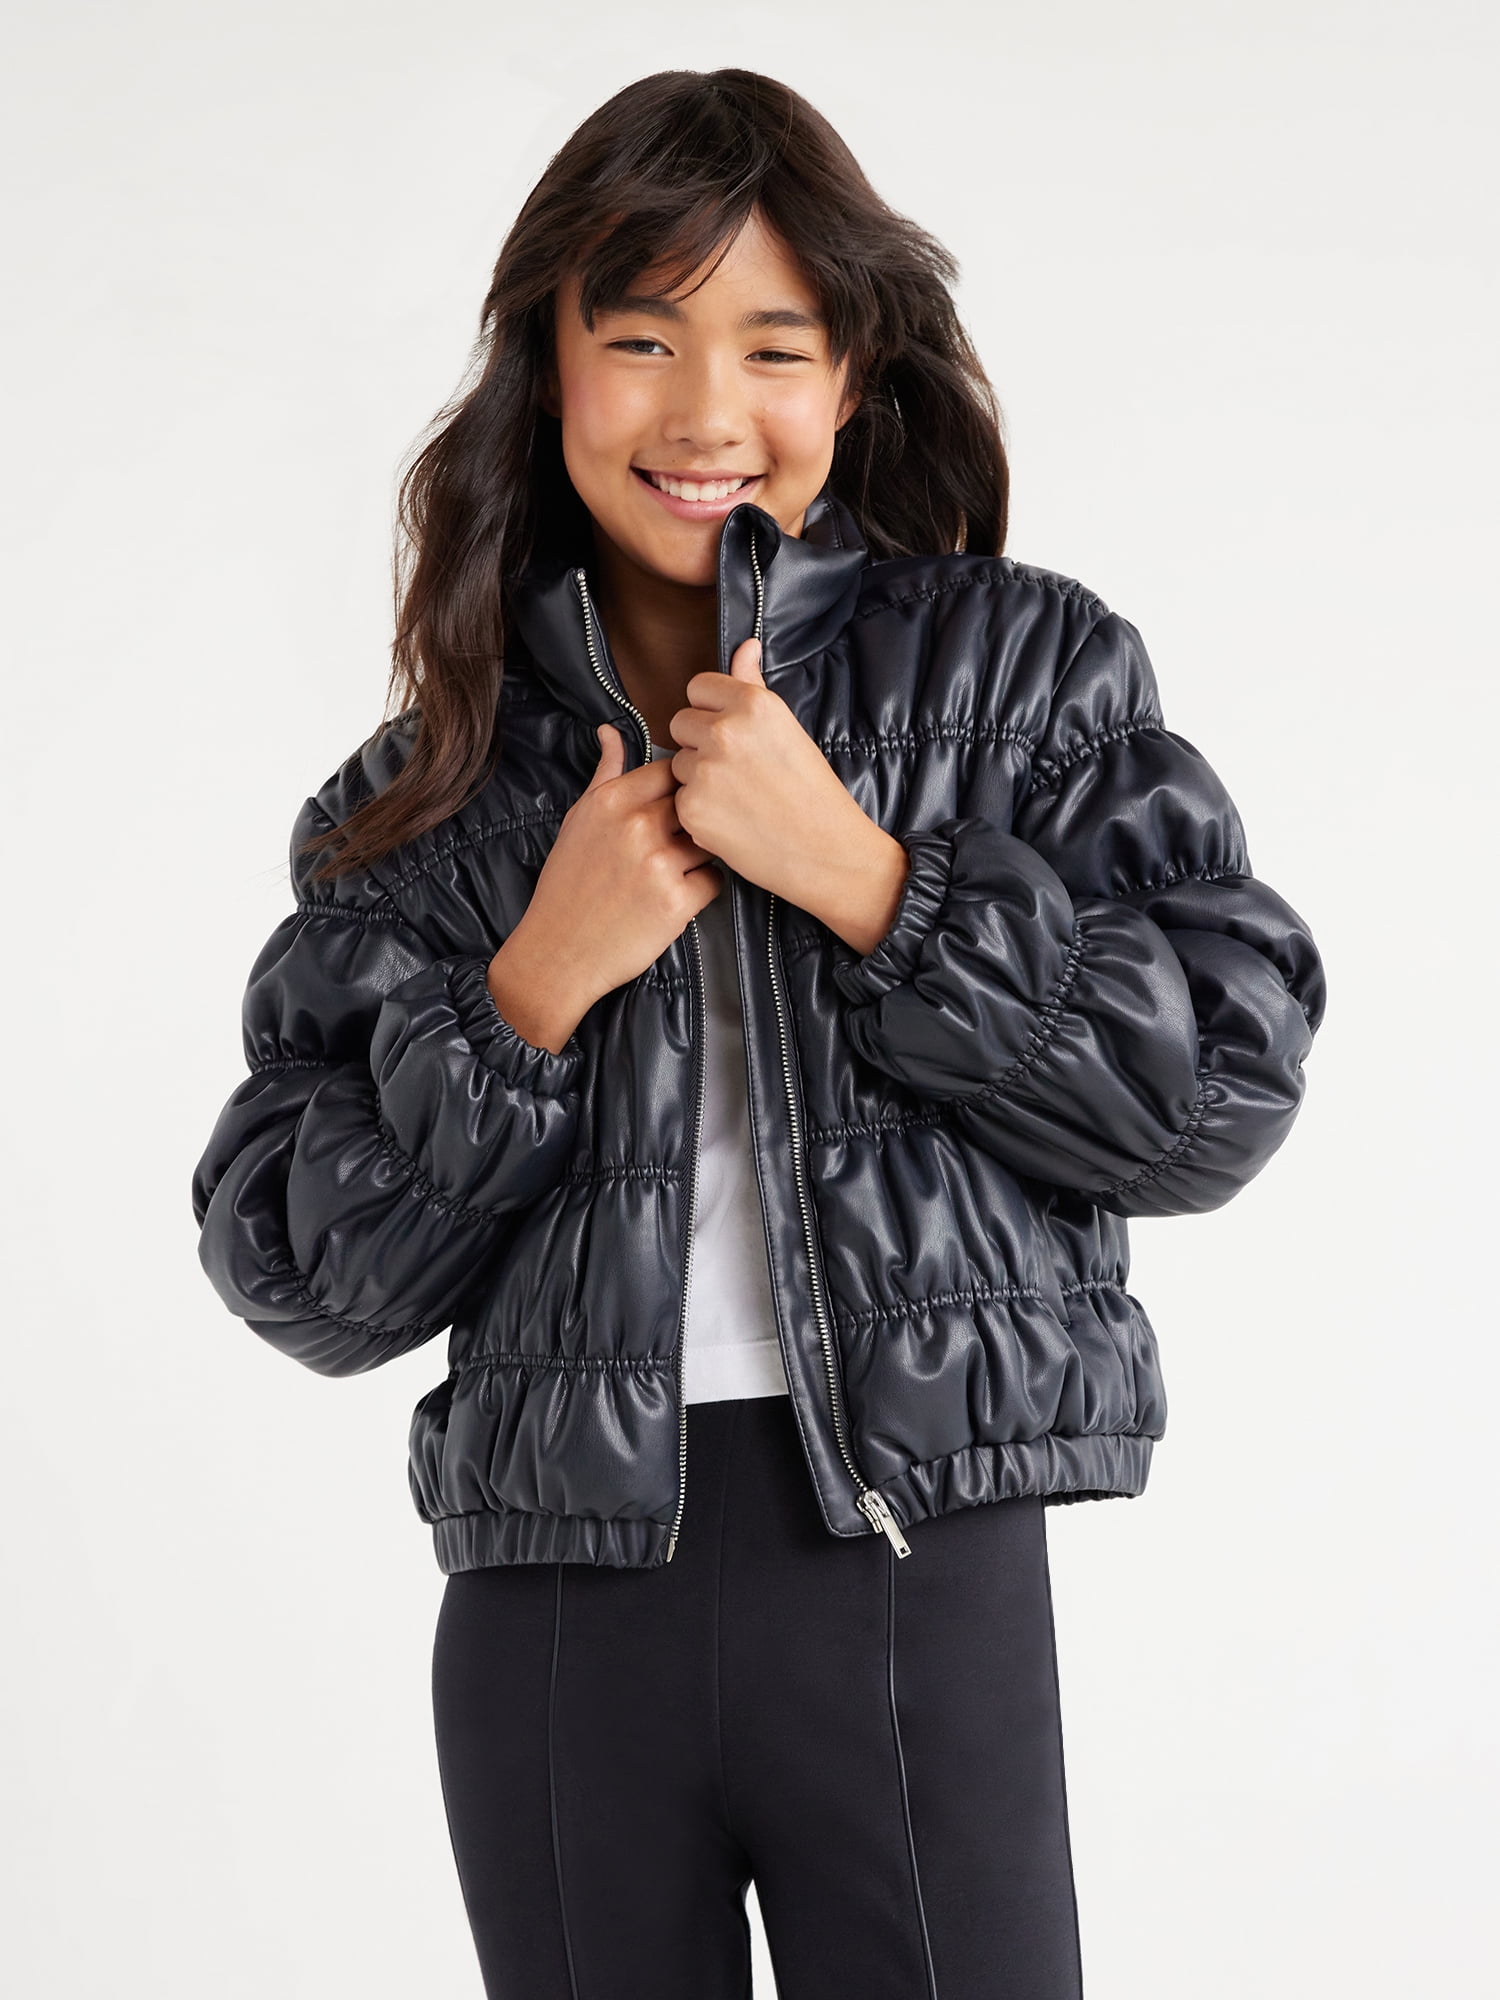 Scoop Girls Faux Leather Ruched Puffer Jacket, Sizes 4-18 - Walmart.com